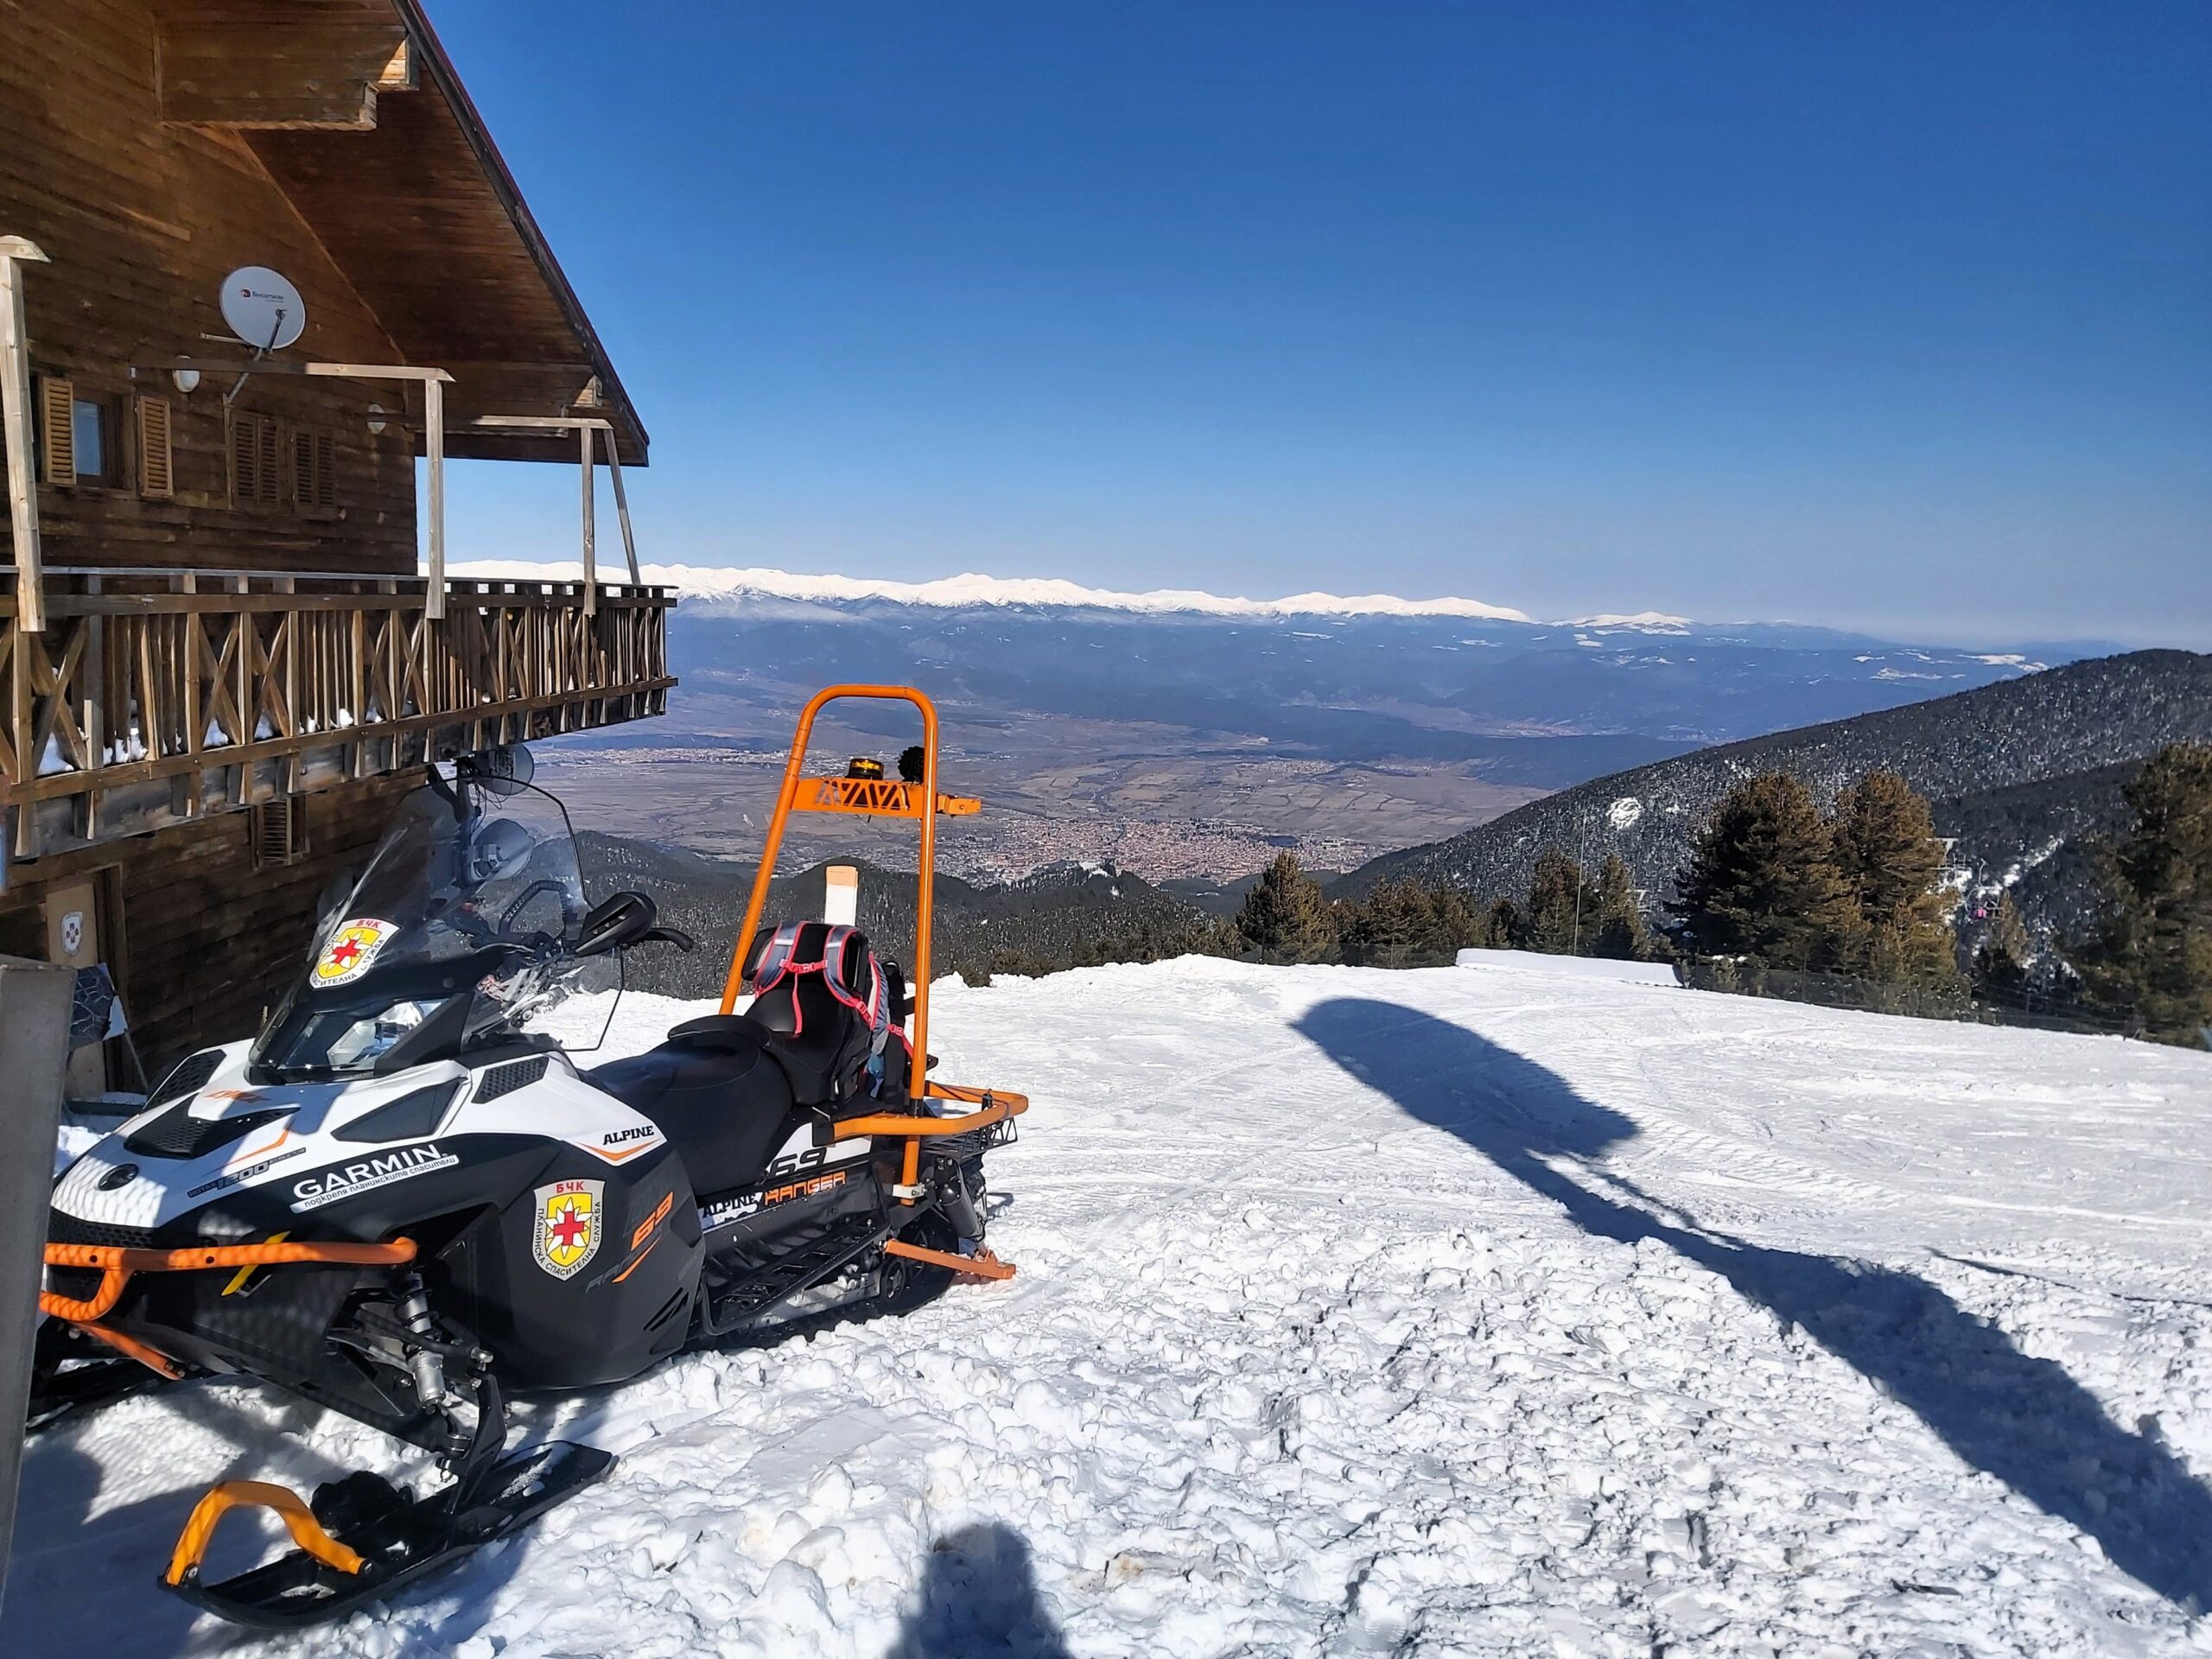 A rescue skiddoo and mountain view in Bansko, Bulgaria